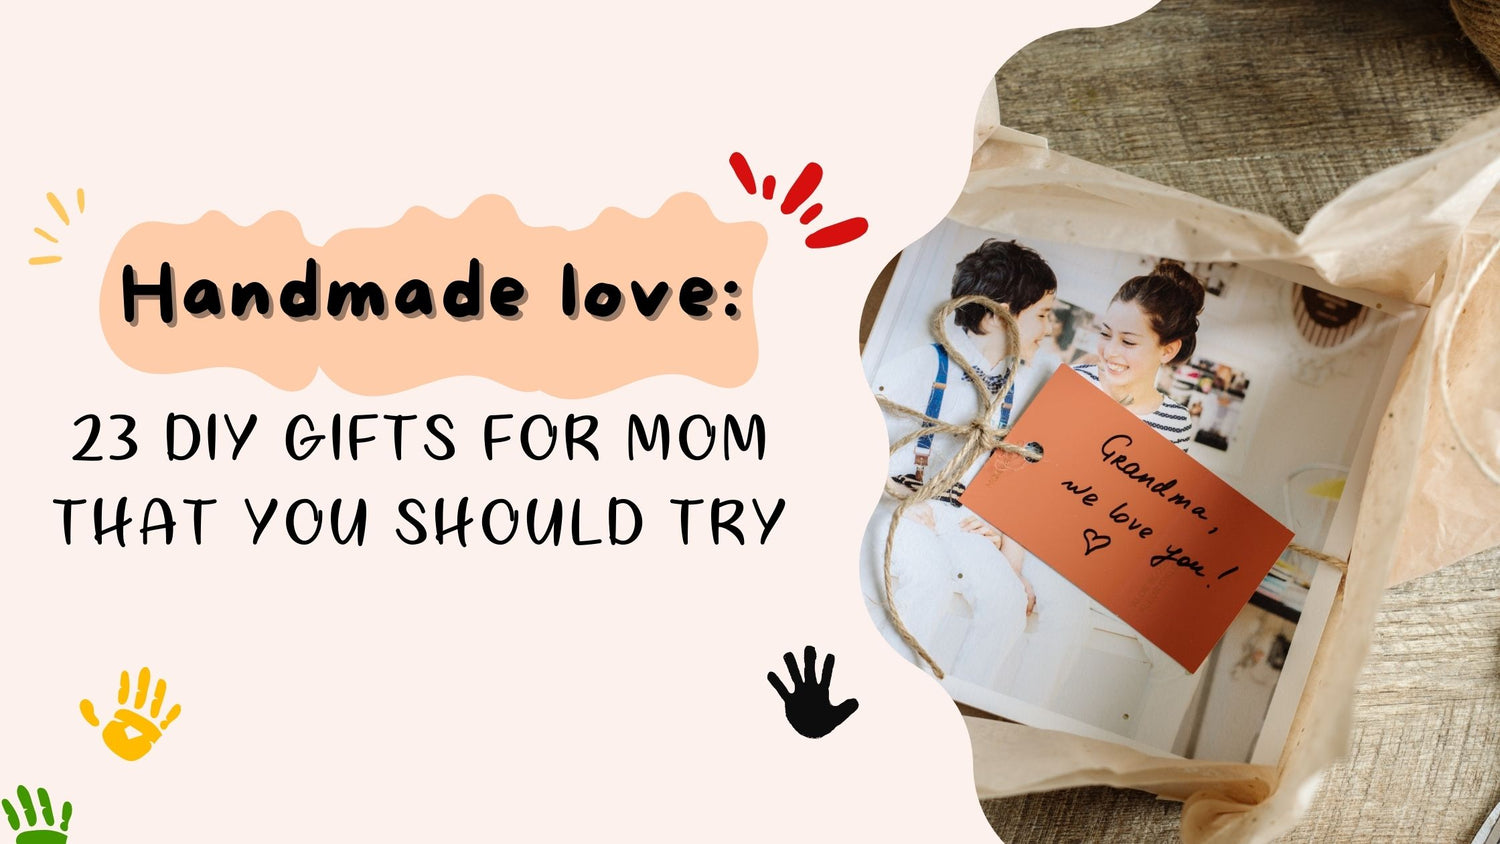 Handmade Love: 23 DIY Gifts for Mom That You Should Try